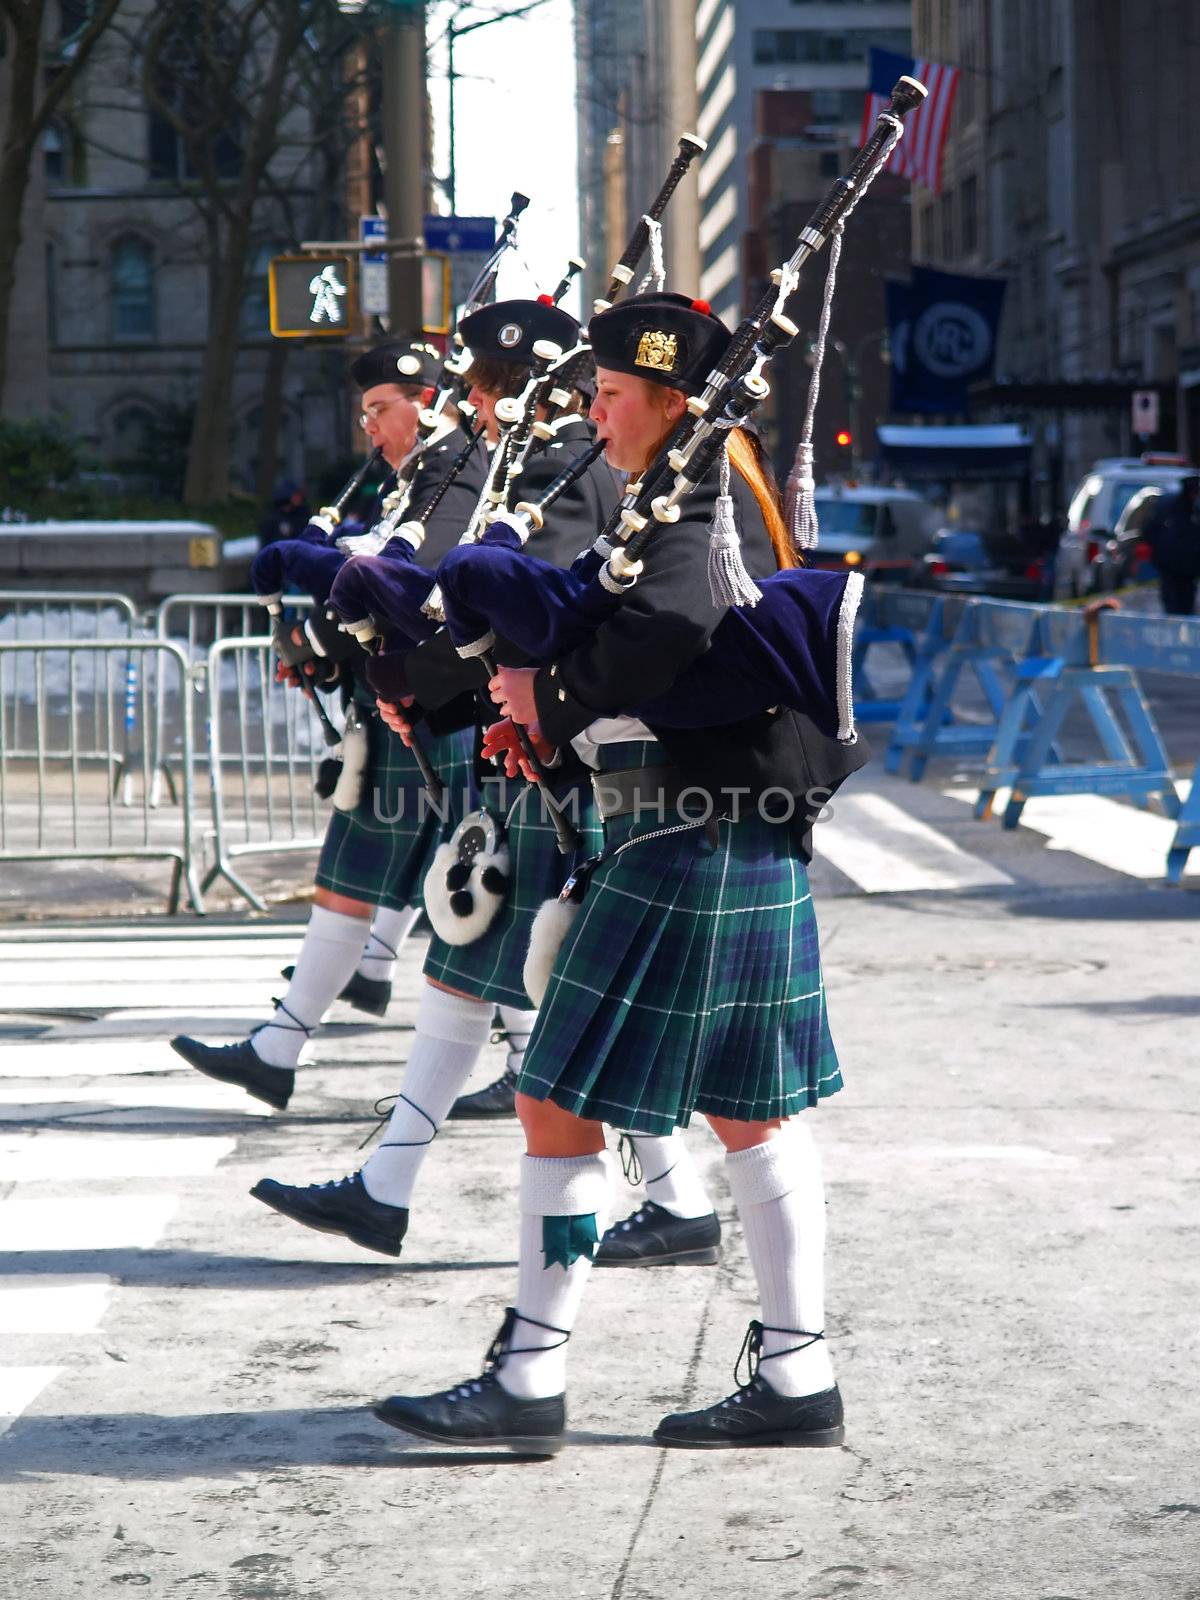 The Saint Patrick Day Parade in New York City